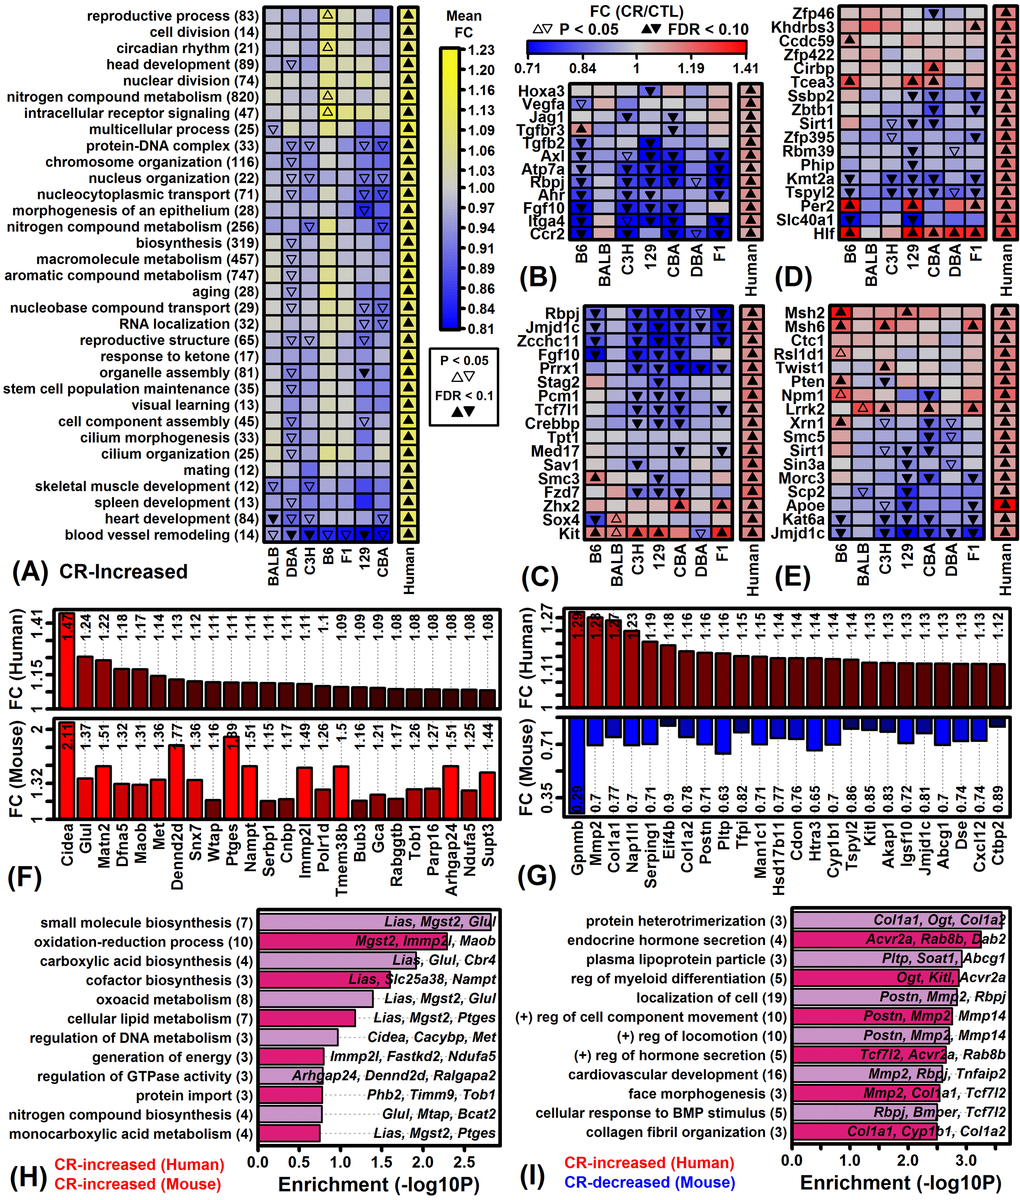 Genes increased by CR in humans and Gene Ontology-based mouse comparison. (A) GO BP terms most strongly enriched among genes increased by CR across 28 human experiments. (B) Genes associated with blood vessel remodeling (GO:0001974). (C) Genes associated with stem cell population maintenance (GO:0019827). (D) Genes associated with biosynthetic process regulation (GO:0009889). (E) Genes associated with aging (GO:0007568). (F) Genes most strongly increased by CR in humans and mice. (G) Genes increased by CR in humans but decreased in mice. In (F) and (G), color-coded bars show average FC estimates in humans (top) and mice (bottom). Average FC estimates are listed within each figure. (H) GO BP terms enriched among 70 genes increased by CR in humans and mice. Genes were increased by 5% on average in humans (FDR I) GO BP terms enriched among 115 genes increased by CR in humans but decreased by CR in mice. Genes were increased by 5% on average in humans (FDR 